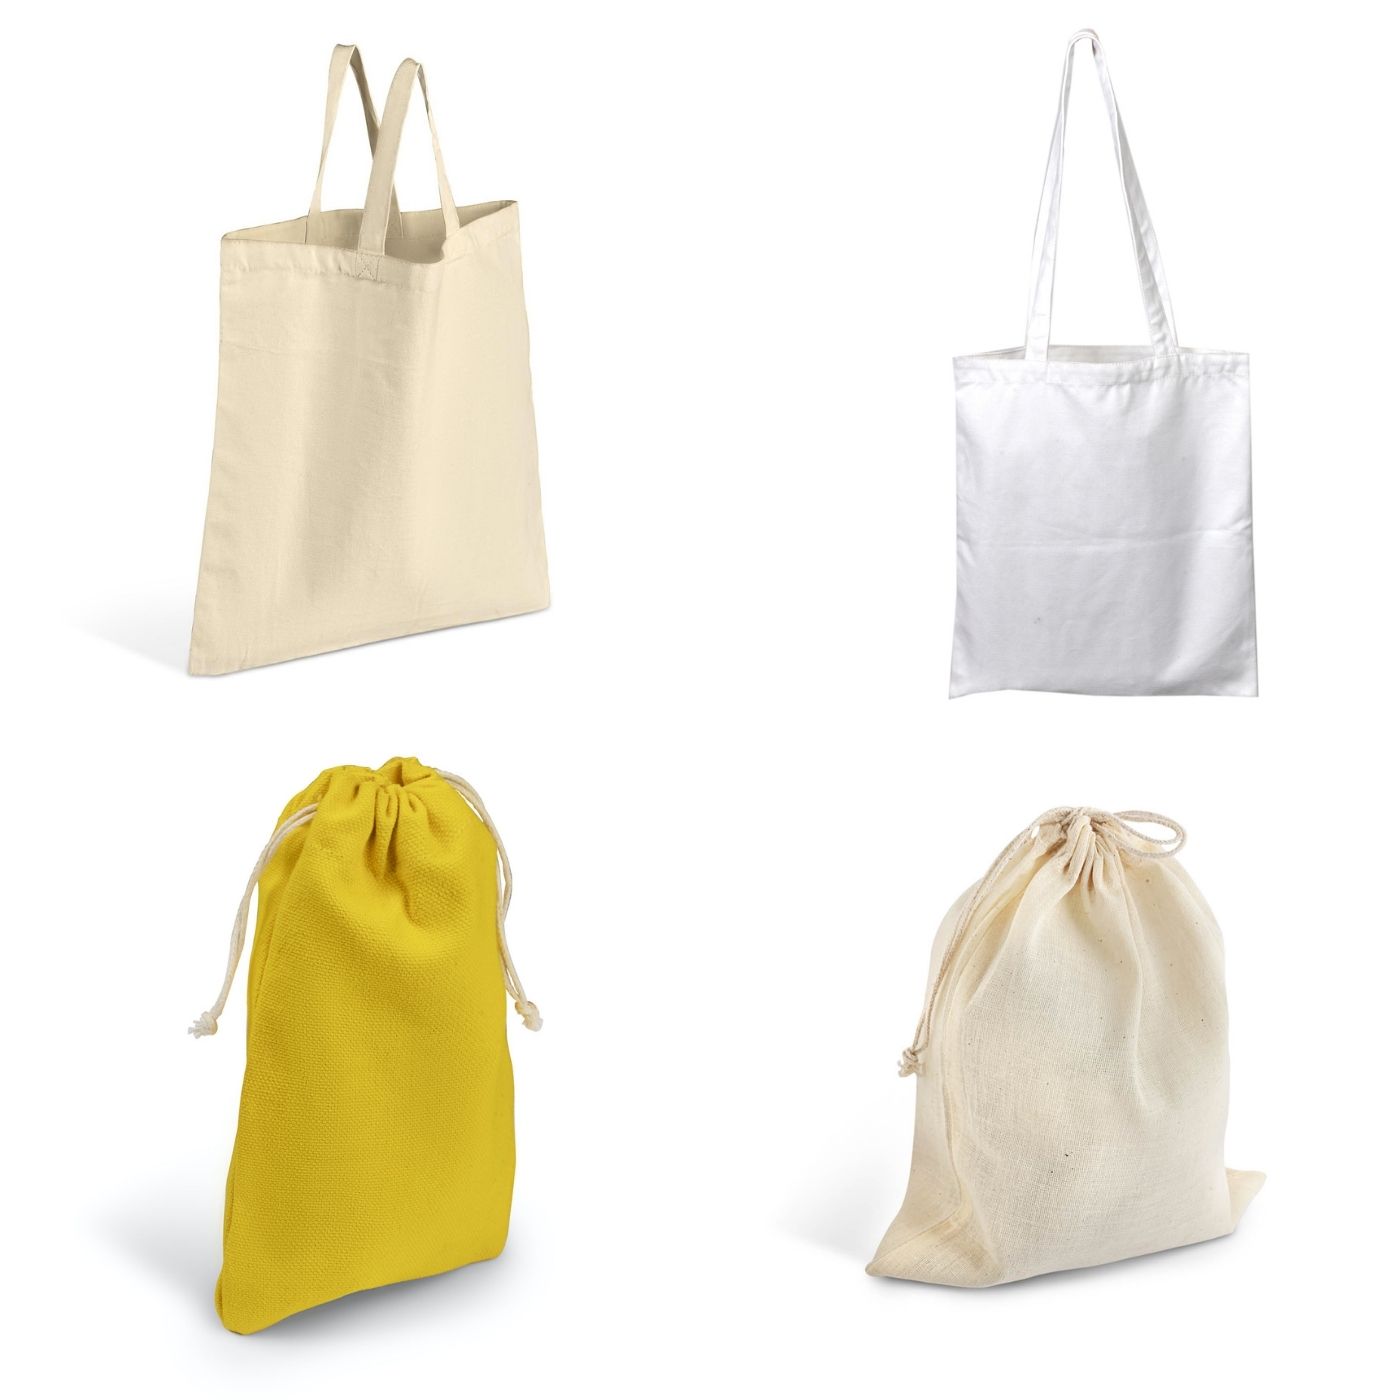 ToteBagFactory 3 Pack) Set of 3 Cotton Tote Bags Wholesale with India | Ubuy